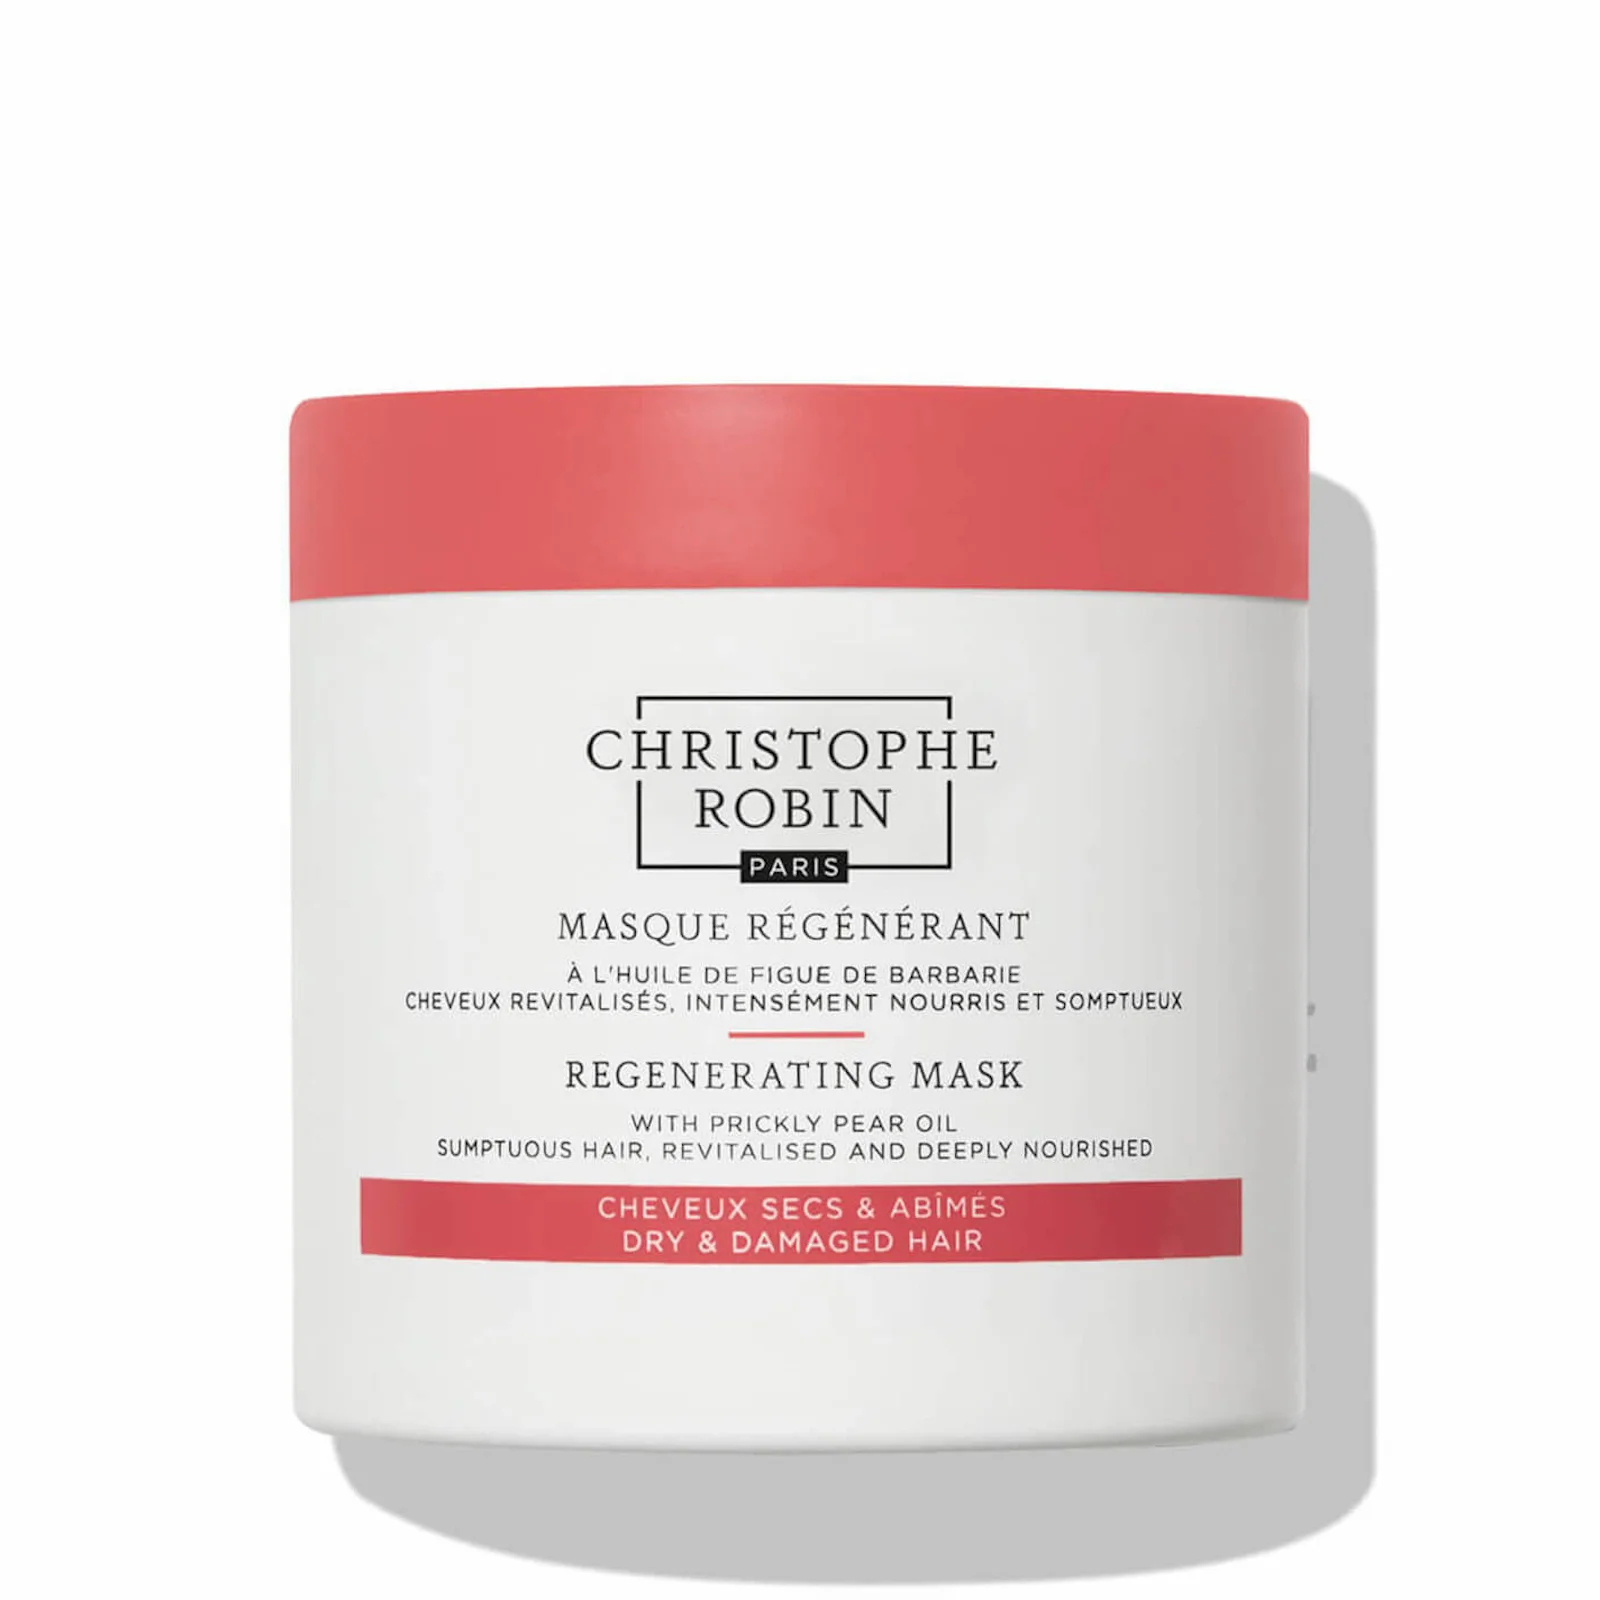 Christophe Robin Regenerating Mask with Prickly Pear Oil 250ml Image 1